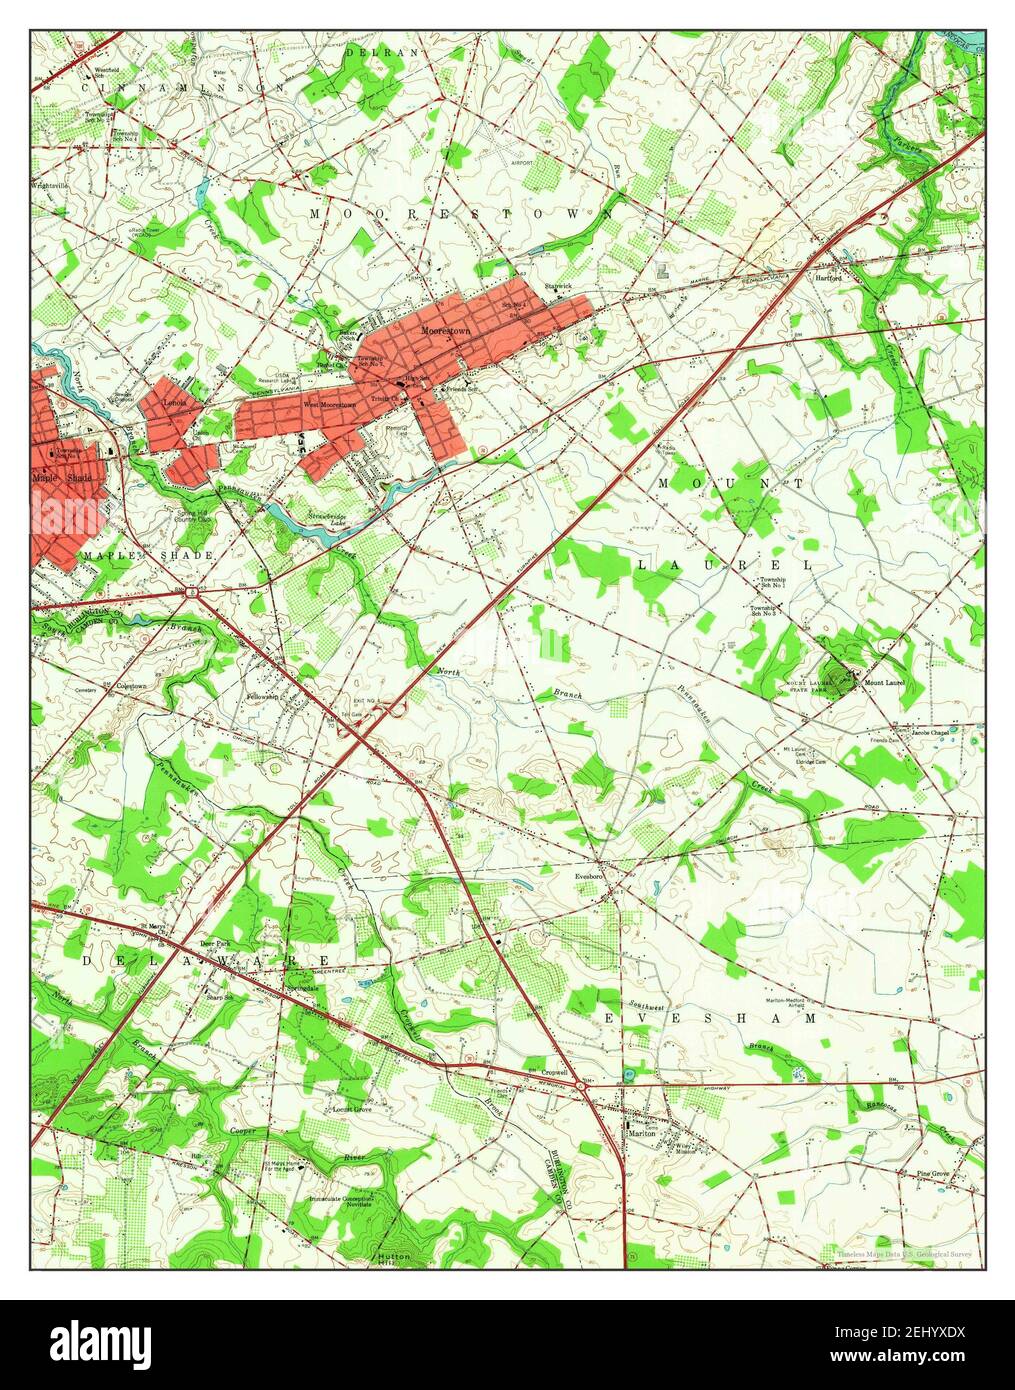 Moorestown, New Jersey, map 1953, 1:24000, United States of America by  Timeless Maps, data U.S. Geological Survey Stock Photo - Alamy